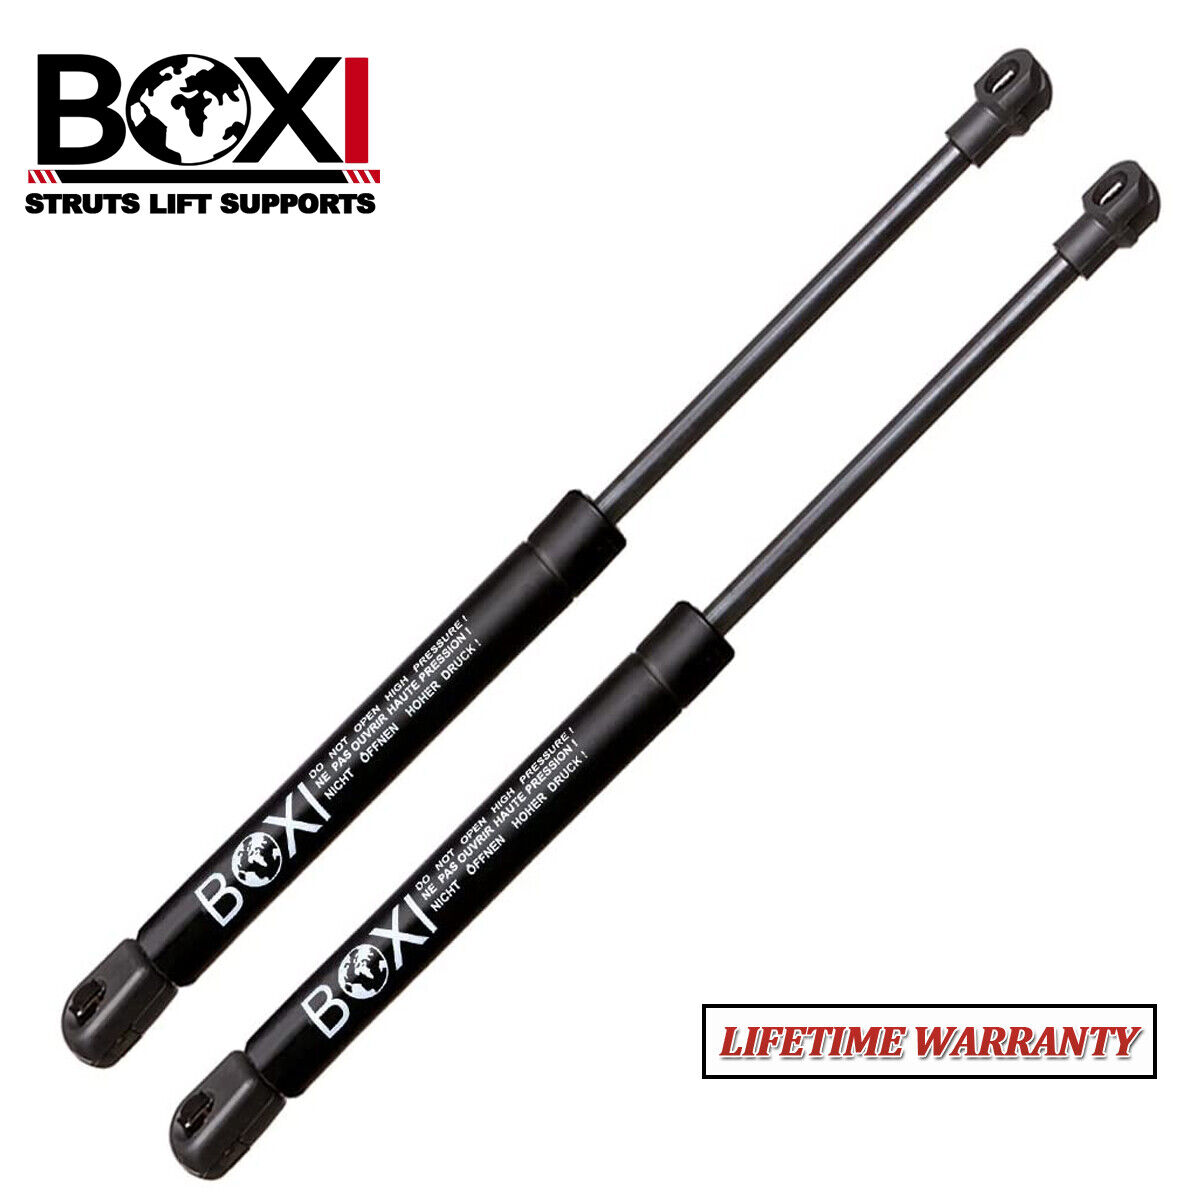 2Pcs Front Hood Lift Supports For Cadillac DTS Buick Lucerne 06 07 08 09 10 11